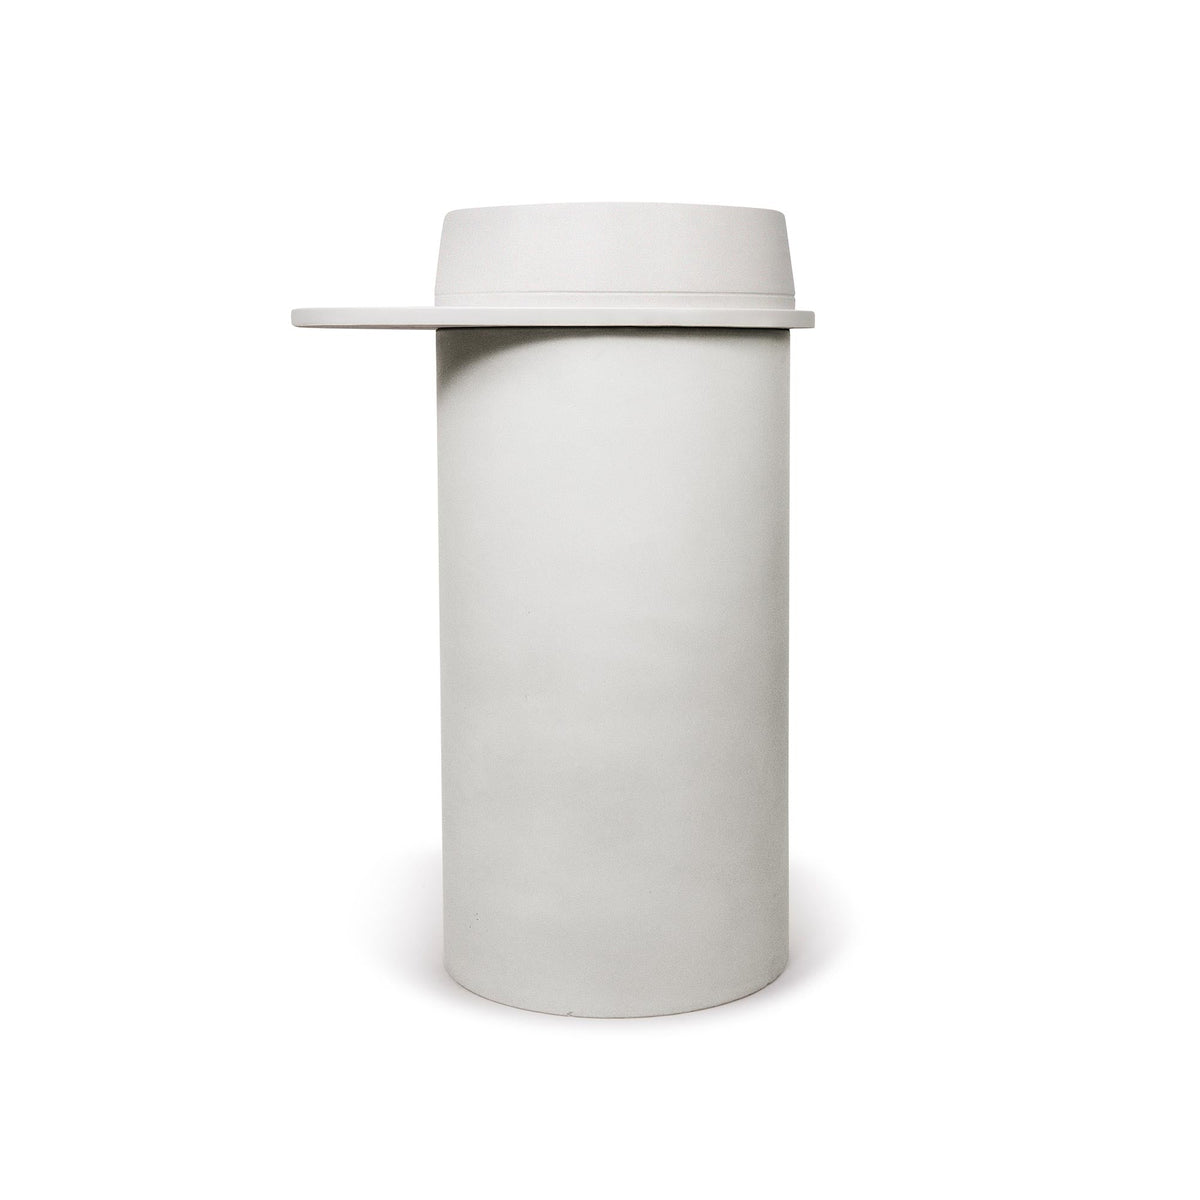 Cylinder with Tray - Funl Basin (Clay,Pastel Peach)